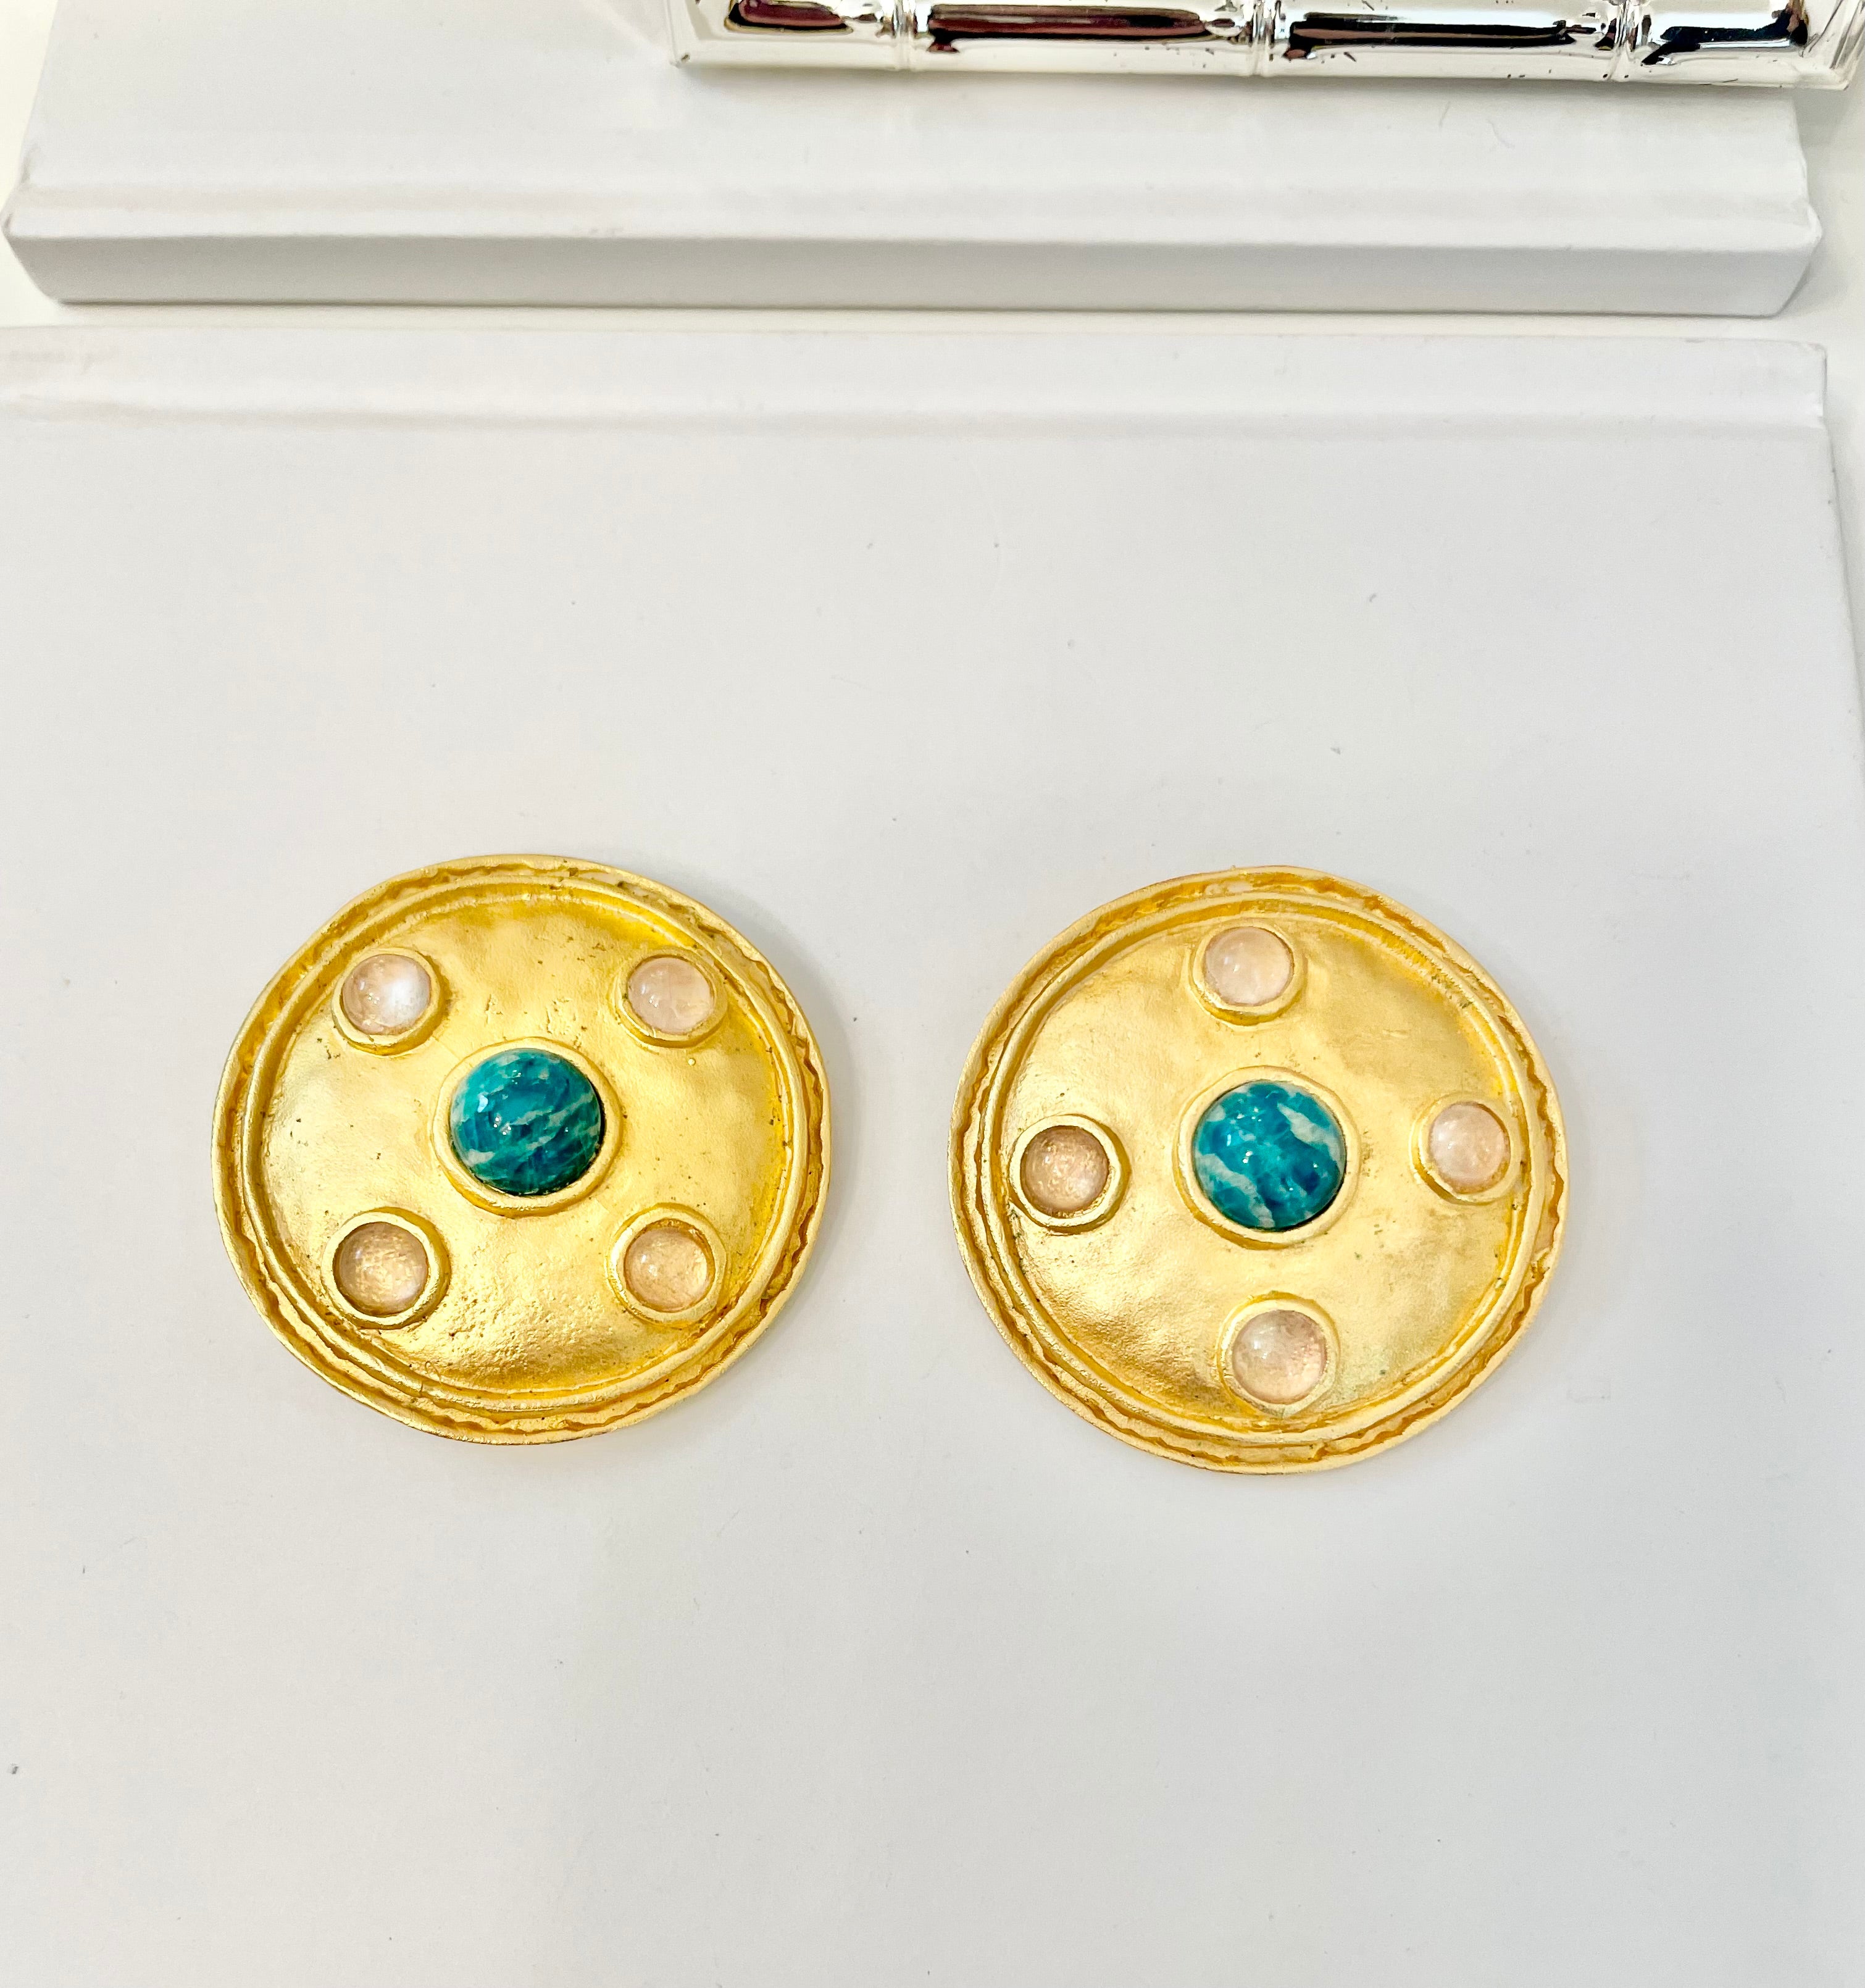 The Socialite and her love affair with the classic gold button earrings! So elegant